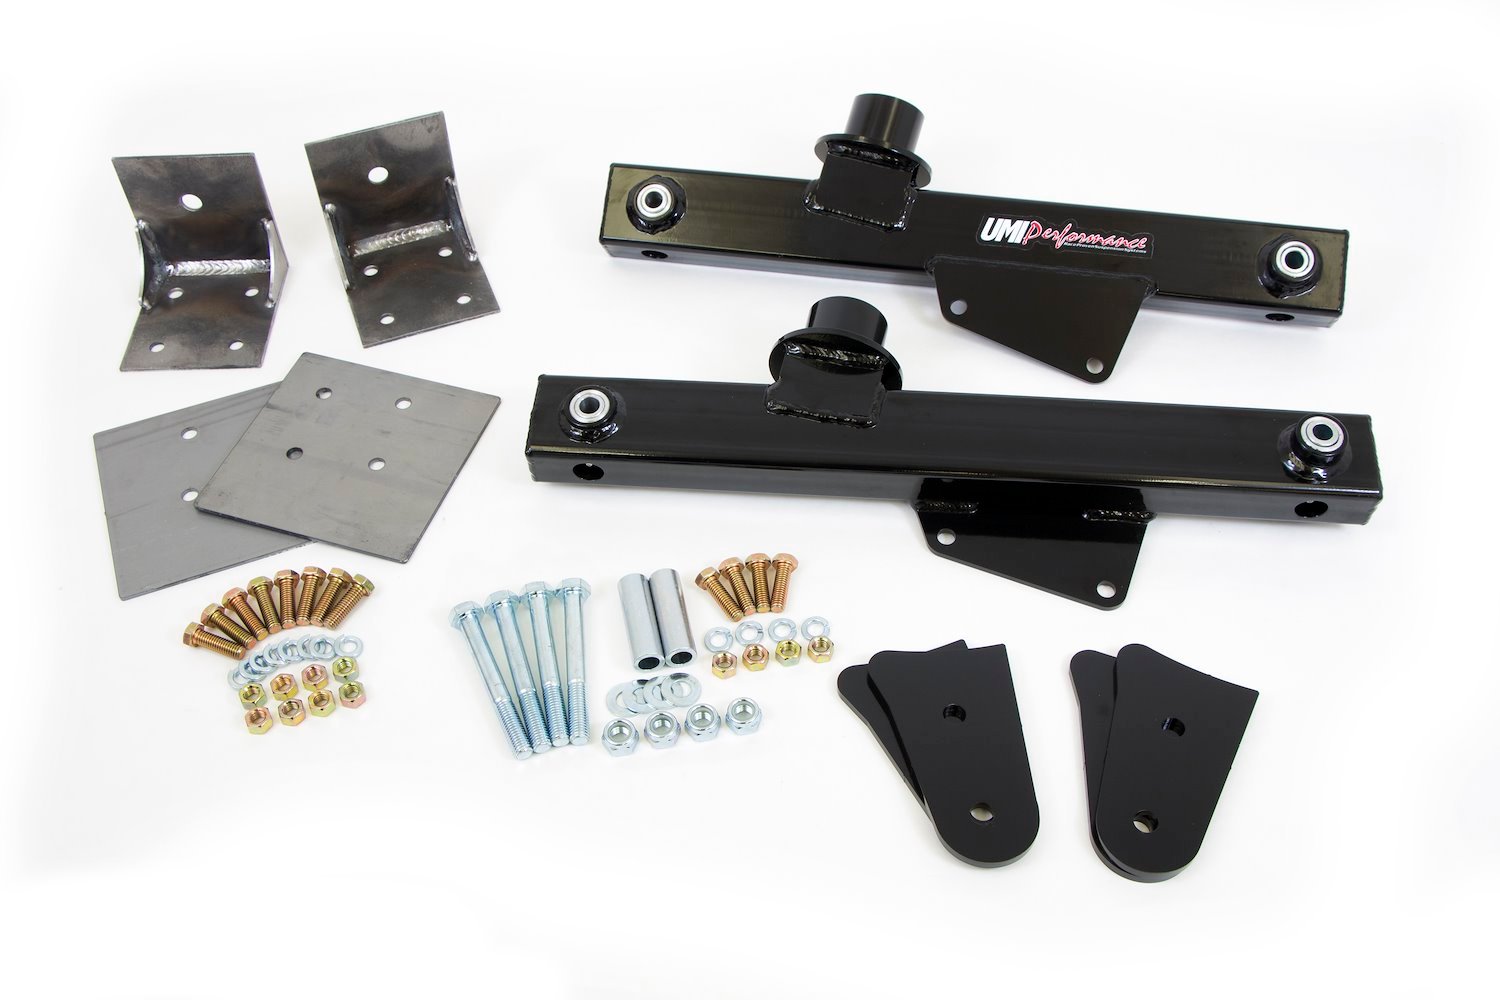 The Strip Grip Kit from UMI includes everything